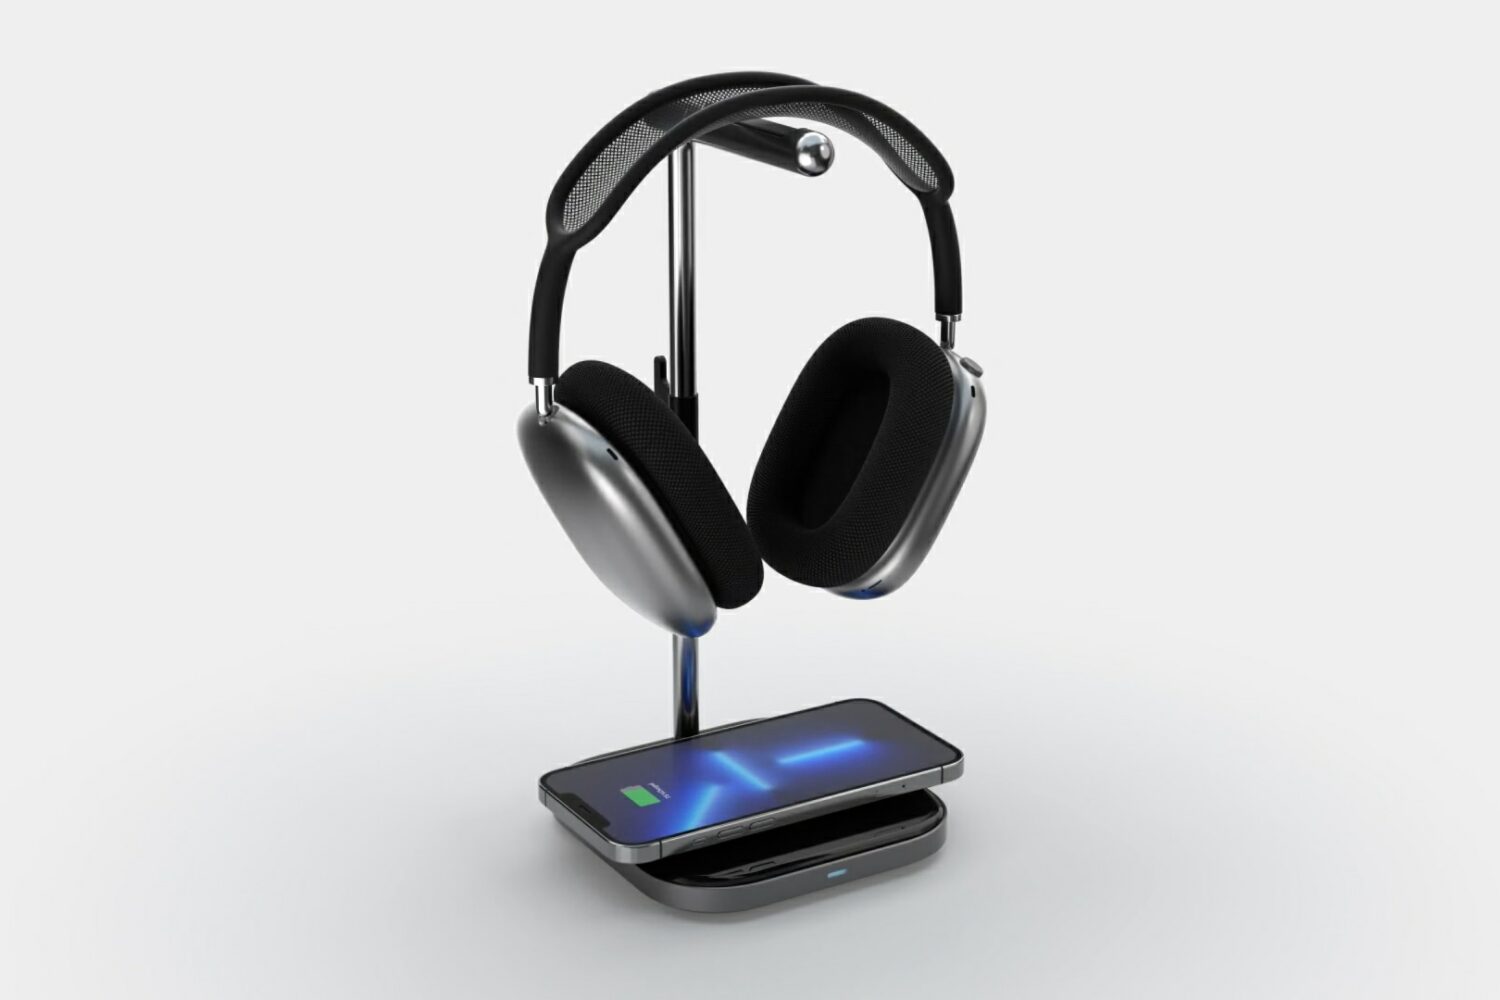 A still image from Satechi's promotional video showing its 2-in-1 Headphone Stand with Wireless Charger being used simultaneously with a pair of AirPods Max and iPhone 13